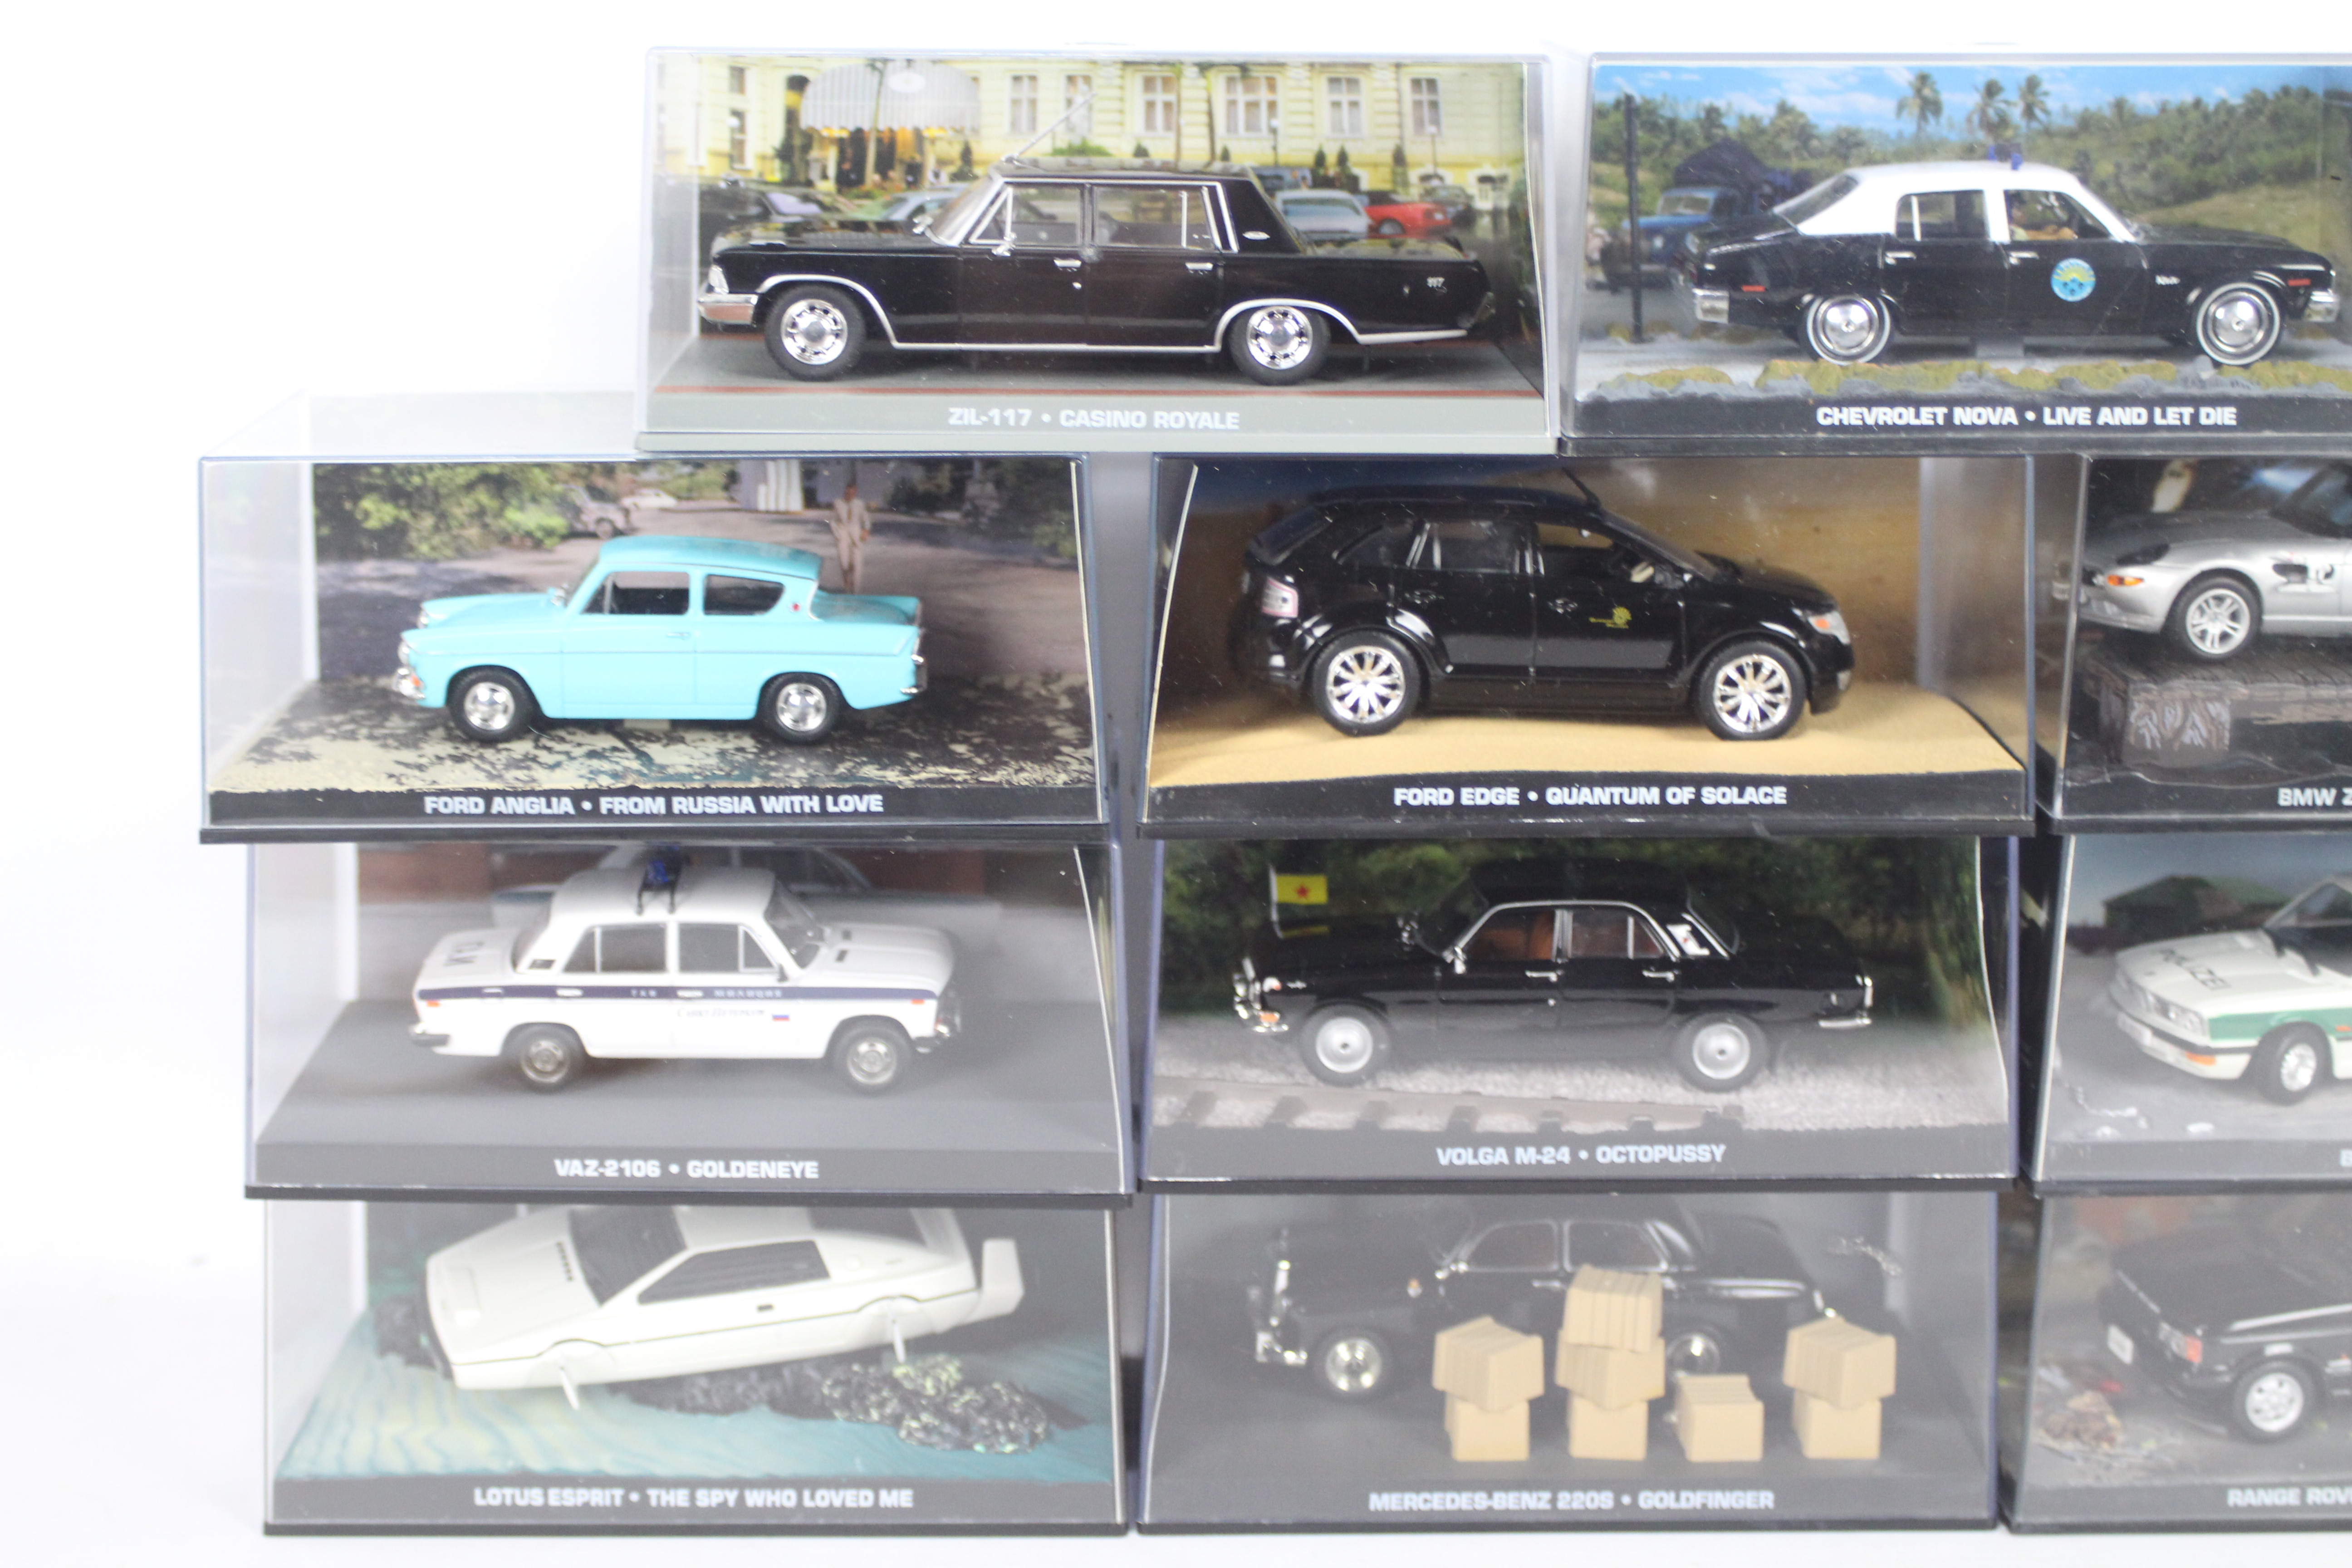 Universal Hobbies / GE Fabbri - 11 boxed diecast model vehicles from 'The James Bond Car - Image 2 of 3